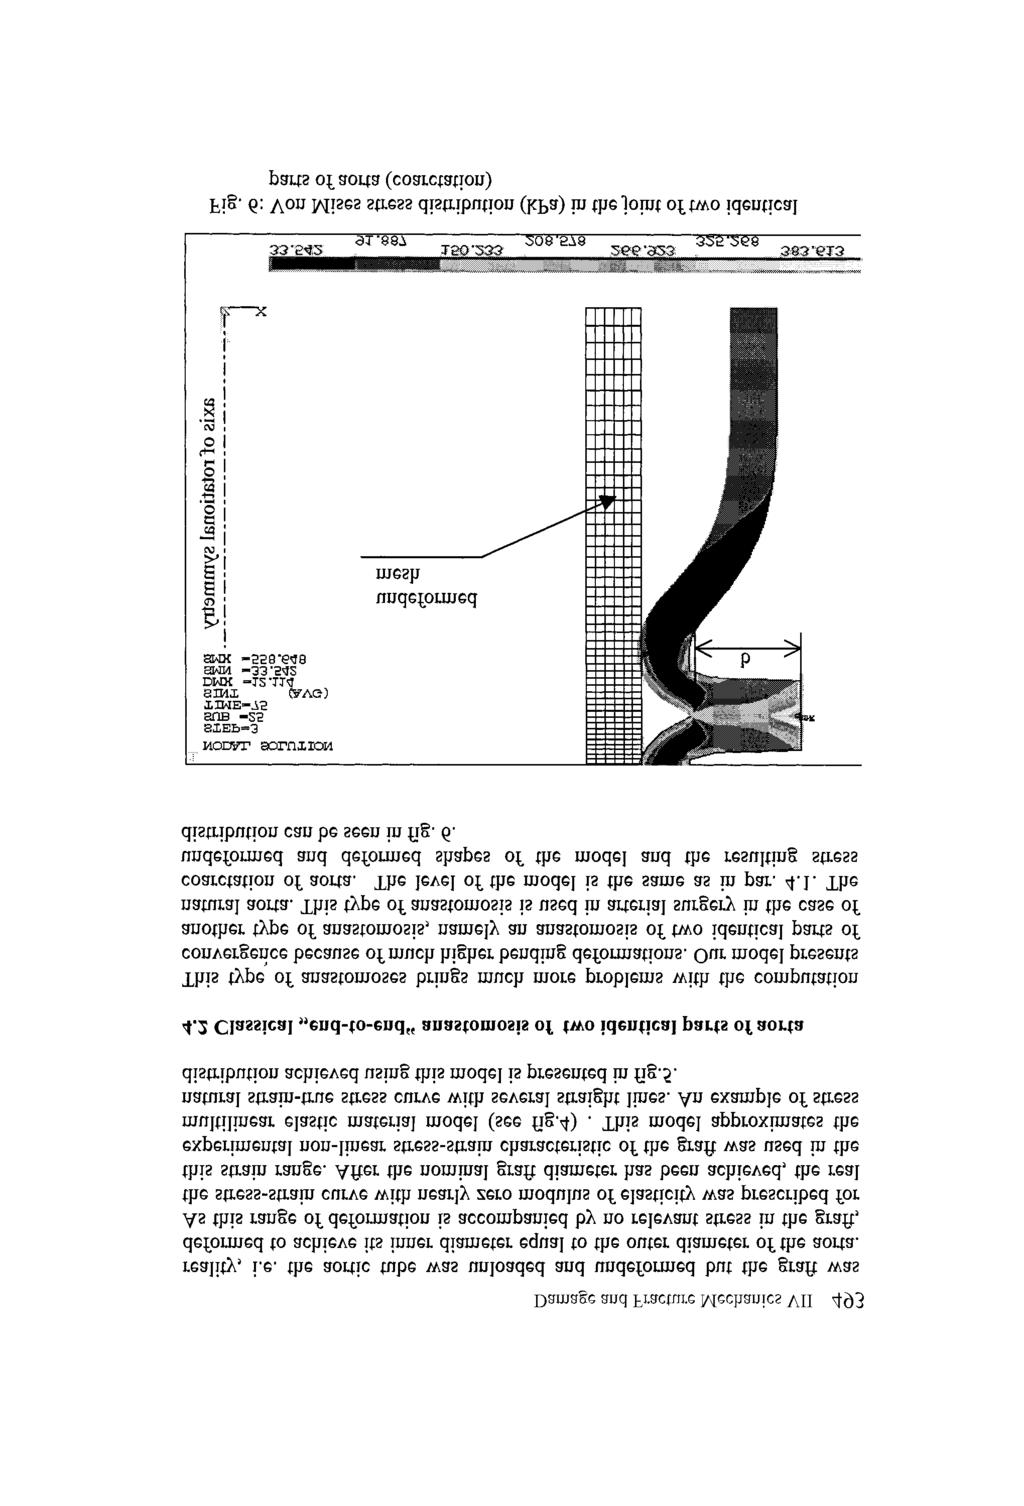 2002 WT Press, Ashurst Lodge, Southampton, SO40 7AA, UK. All rights reserved. Paper from: Damage and Fracture Mechanics V, CA Brebbia, & S Nishida (Editors).